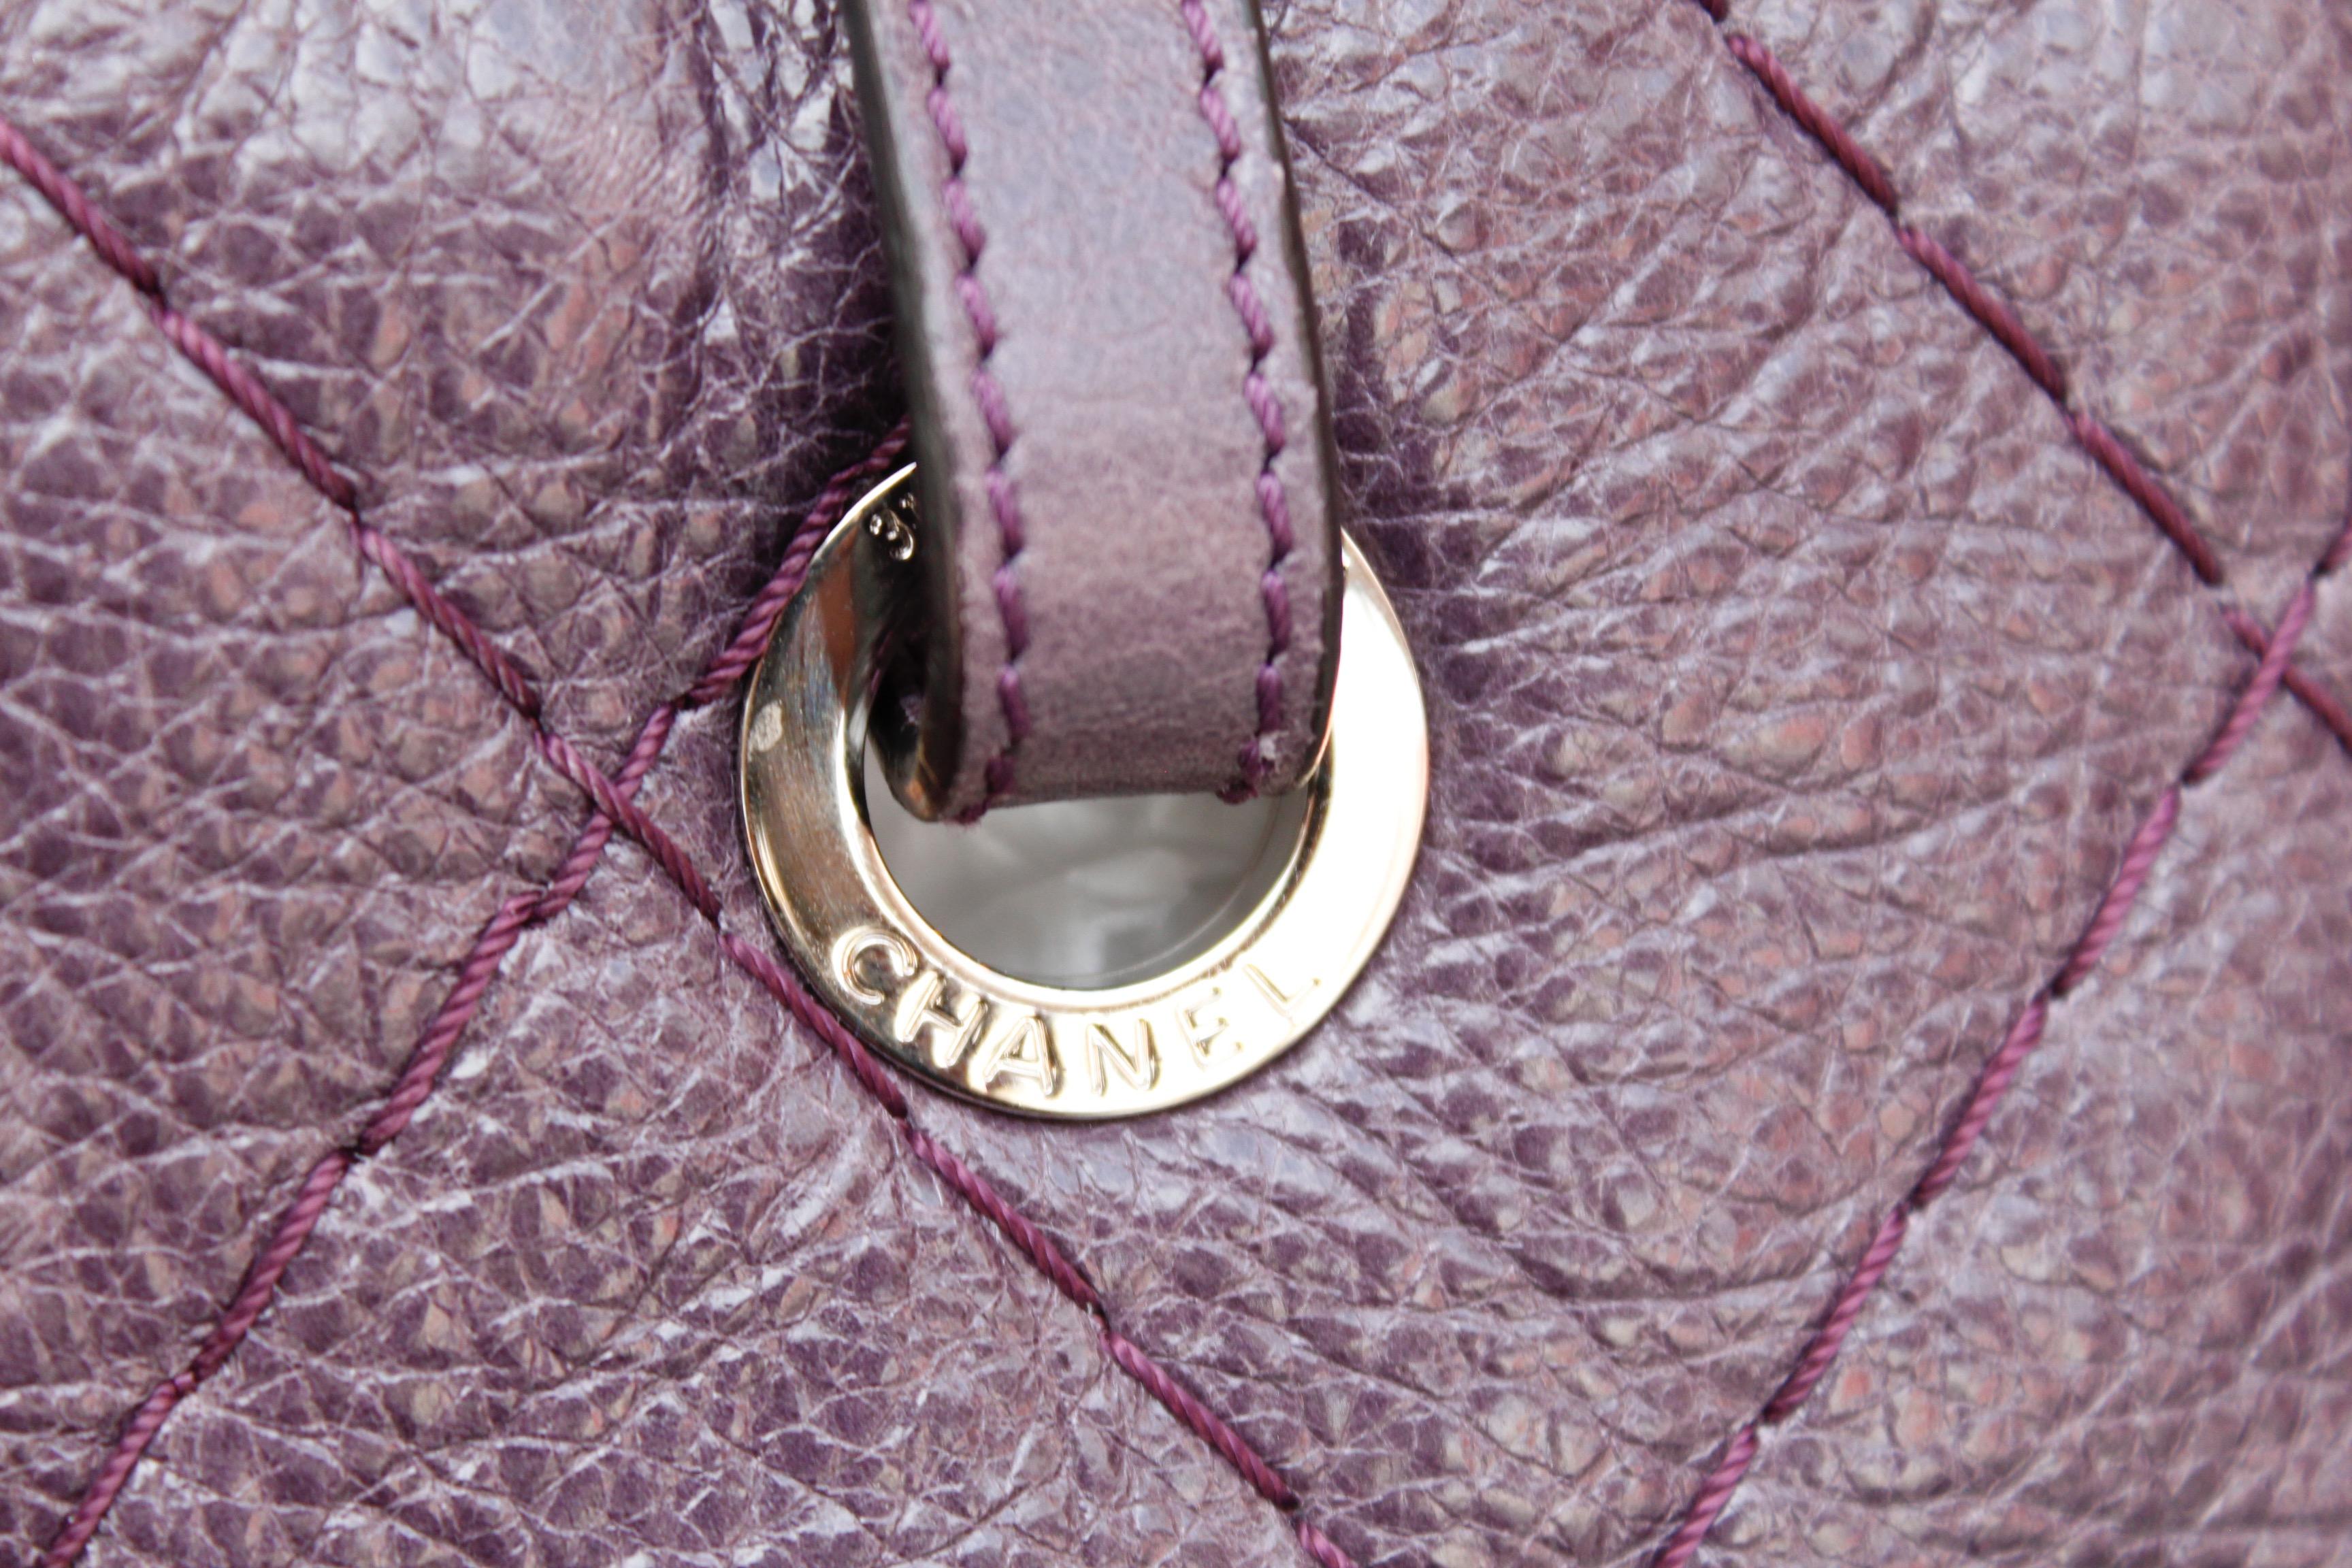 Chanel tote bag in over stitched eggplant leather 6